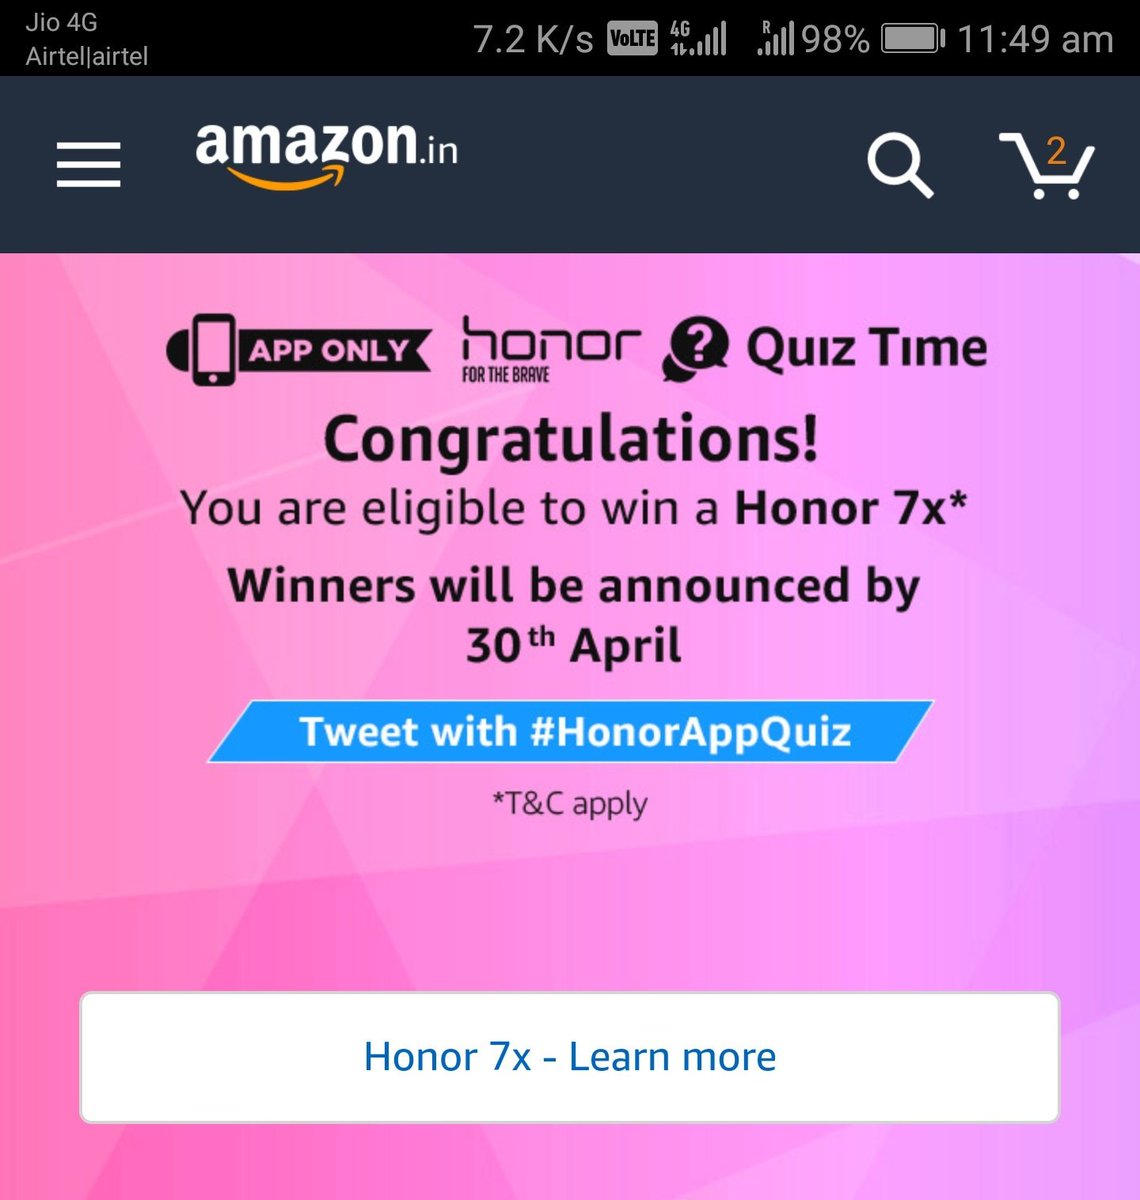 #HonorAppQuiz 
Tq fr Amazon for making also a participant
Hoping for the favourable results